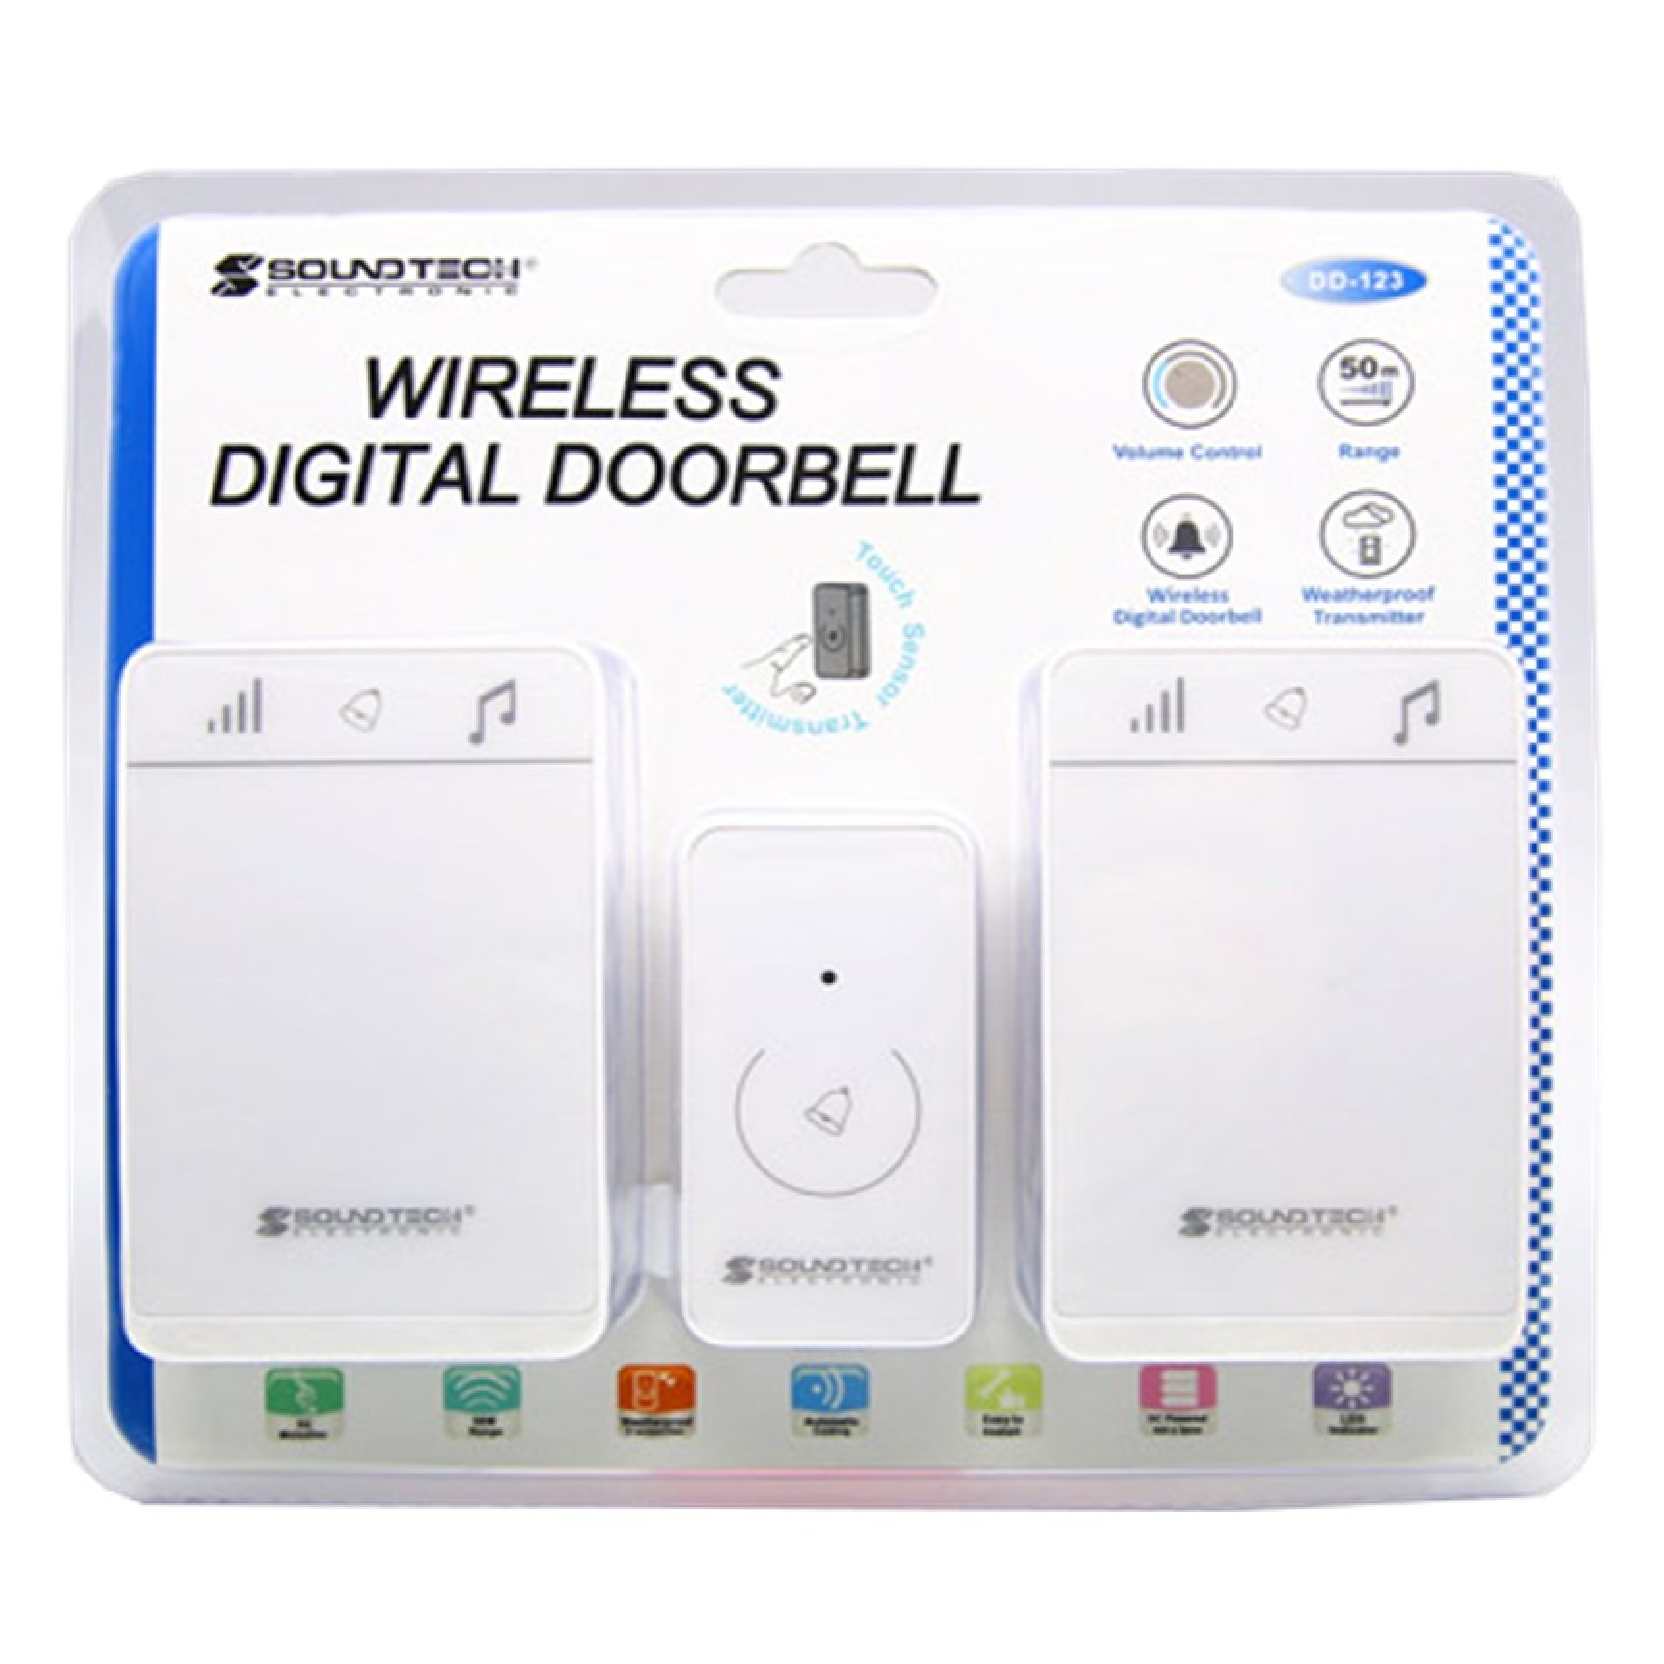 Soundteoh DD-123 Wireless DOUBLE Doorbell BATTERY OPERATED